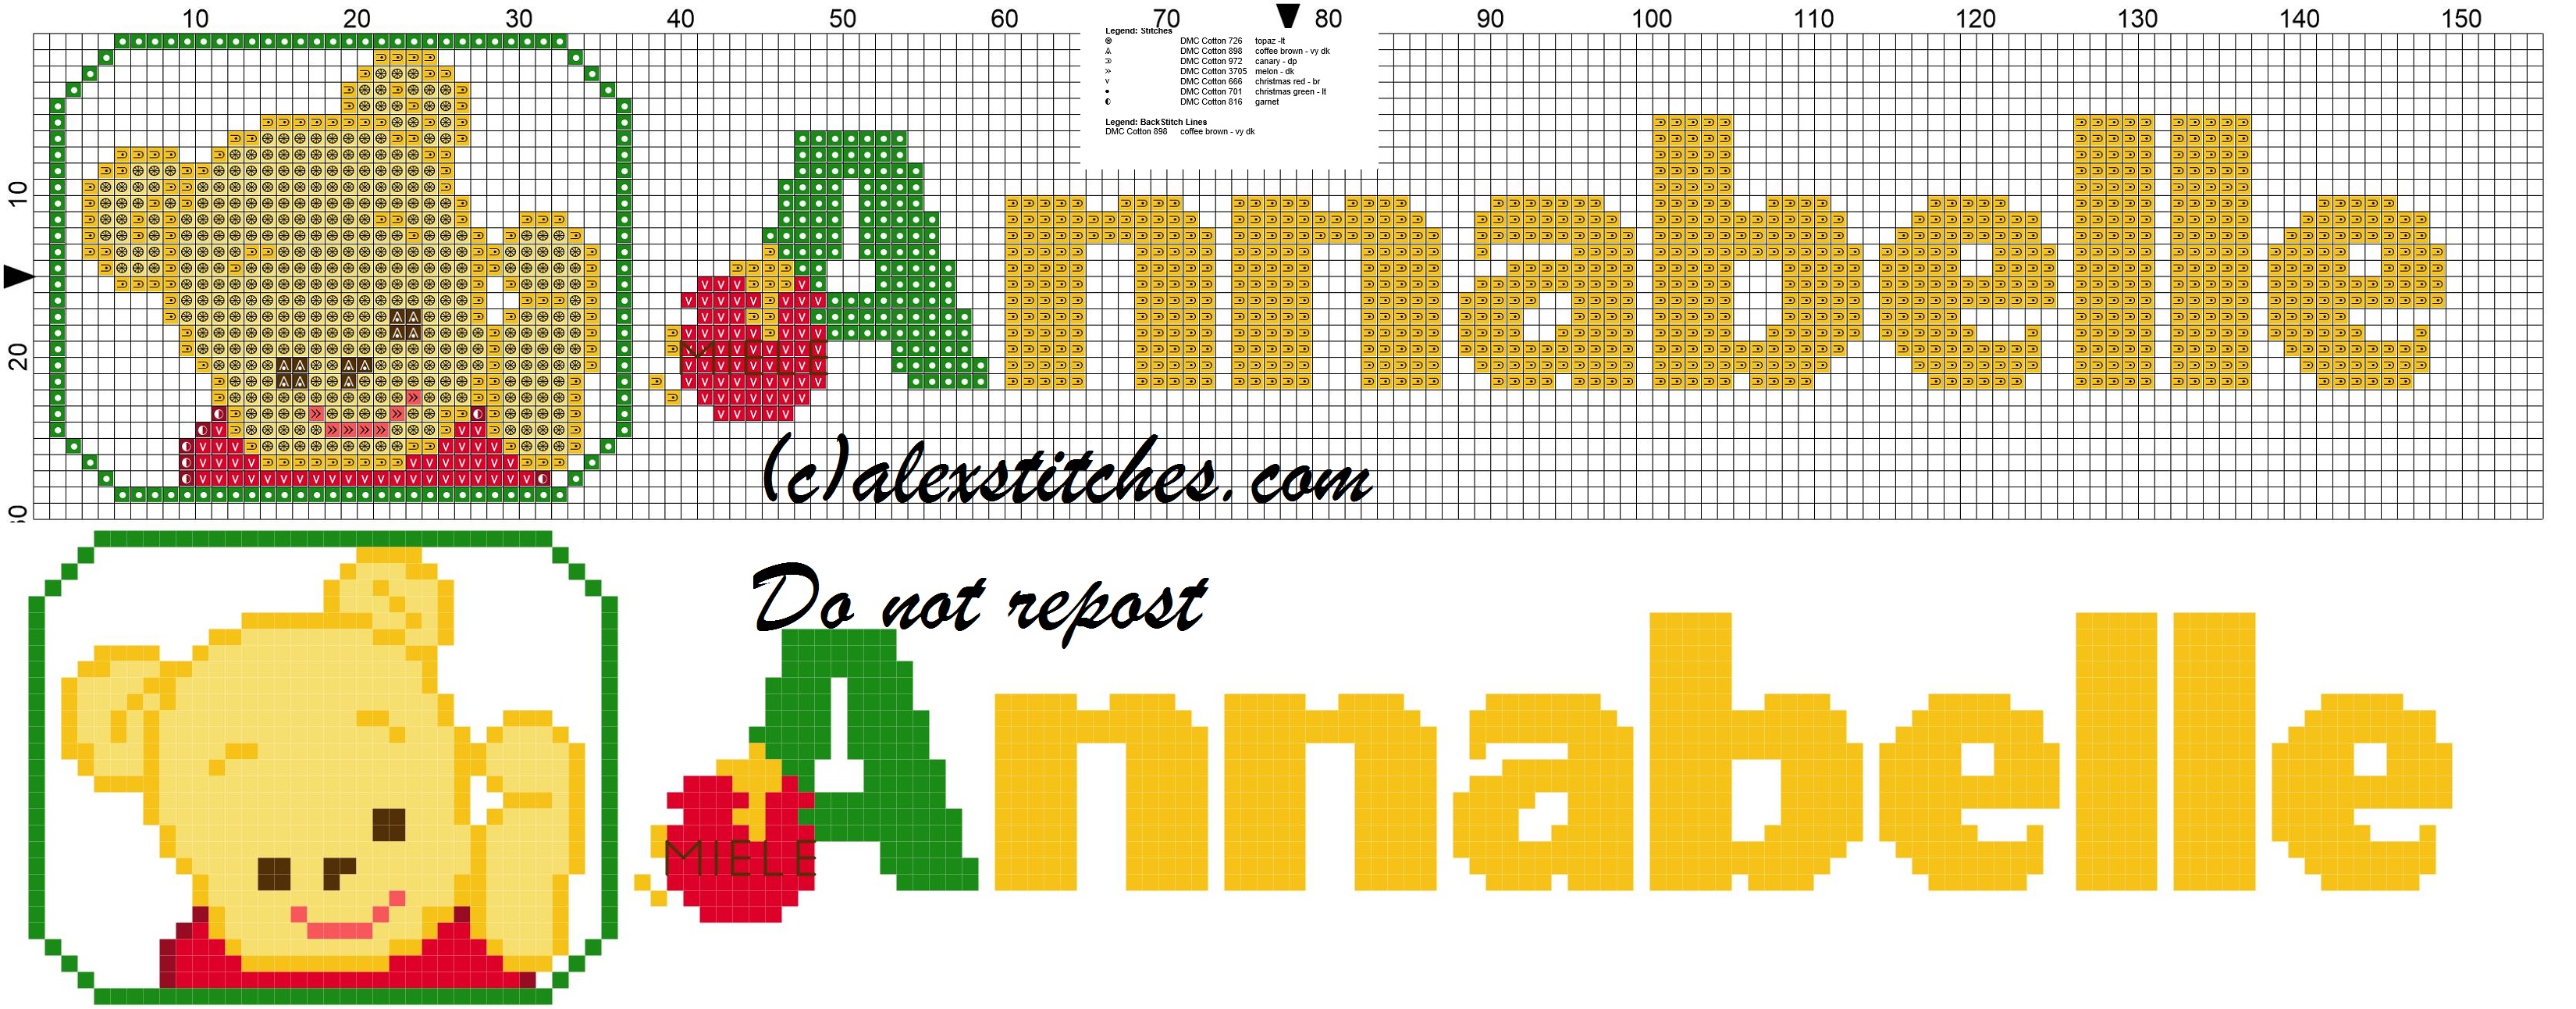 Annabelle name with Baby winnie the pooh free cross stitches pattern